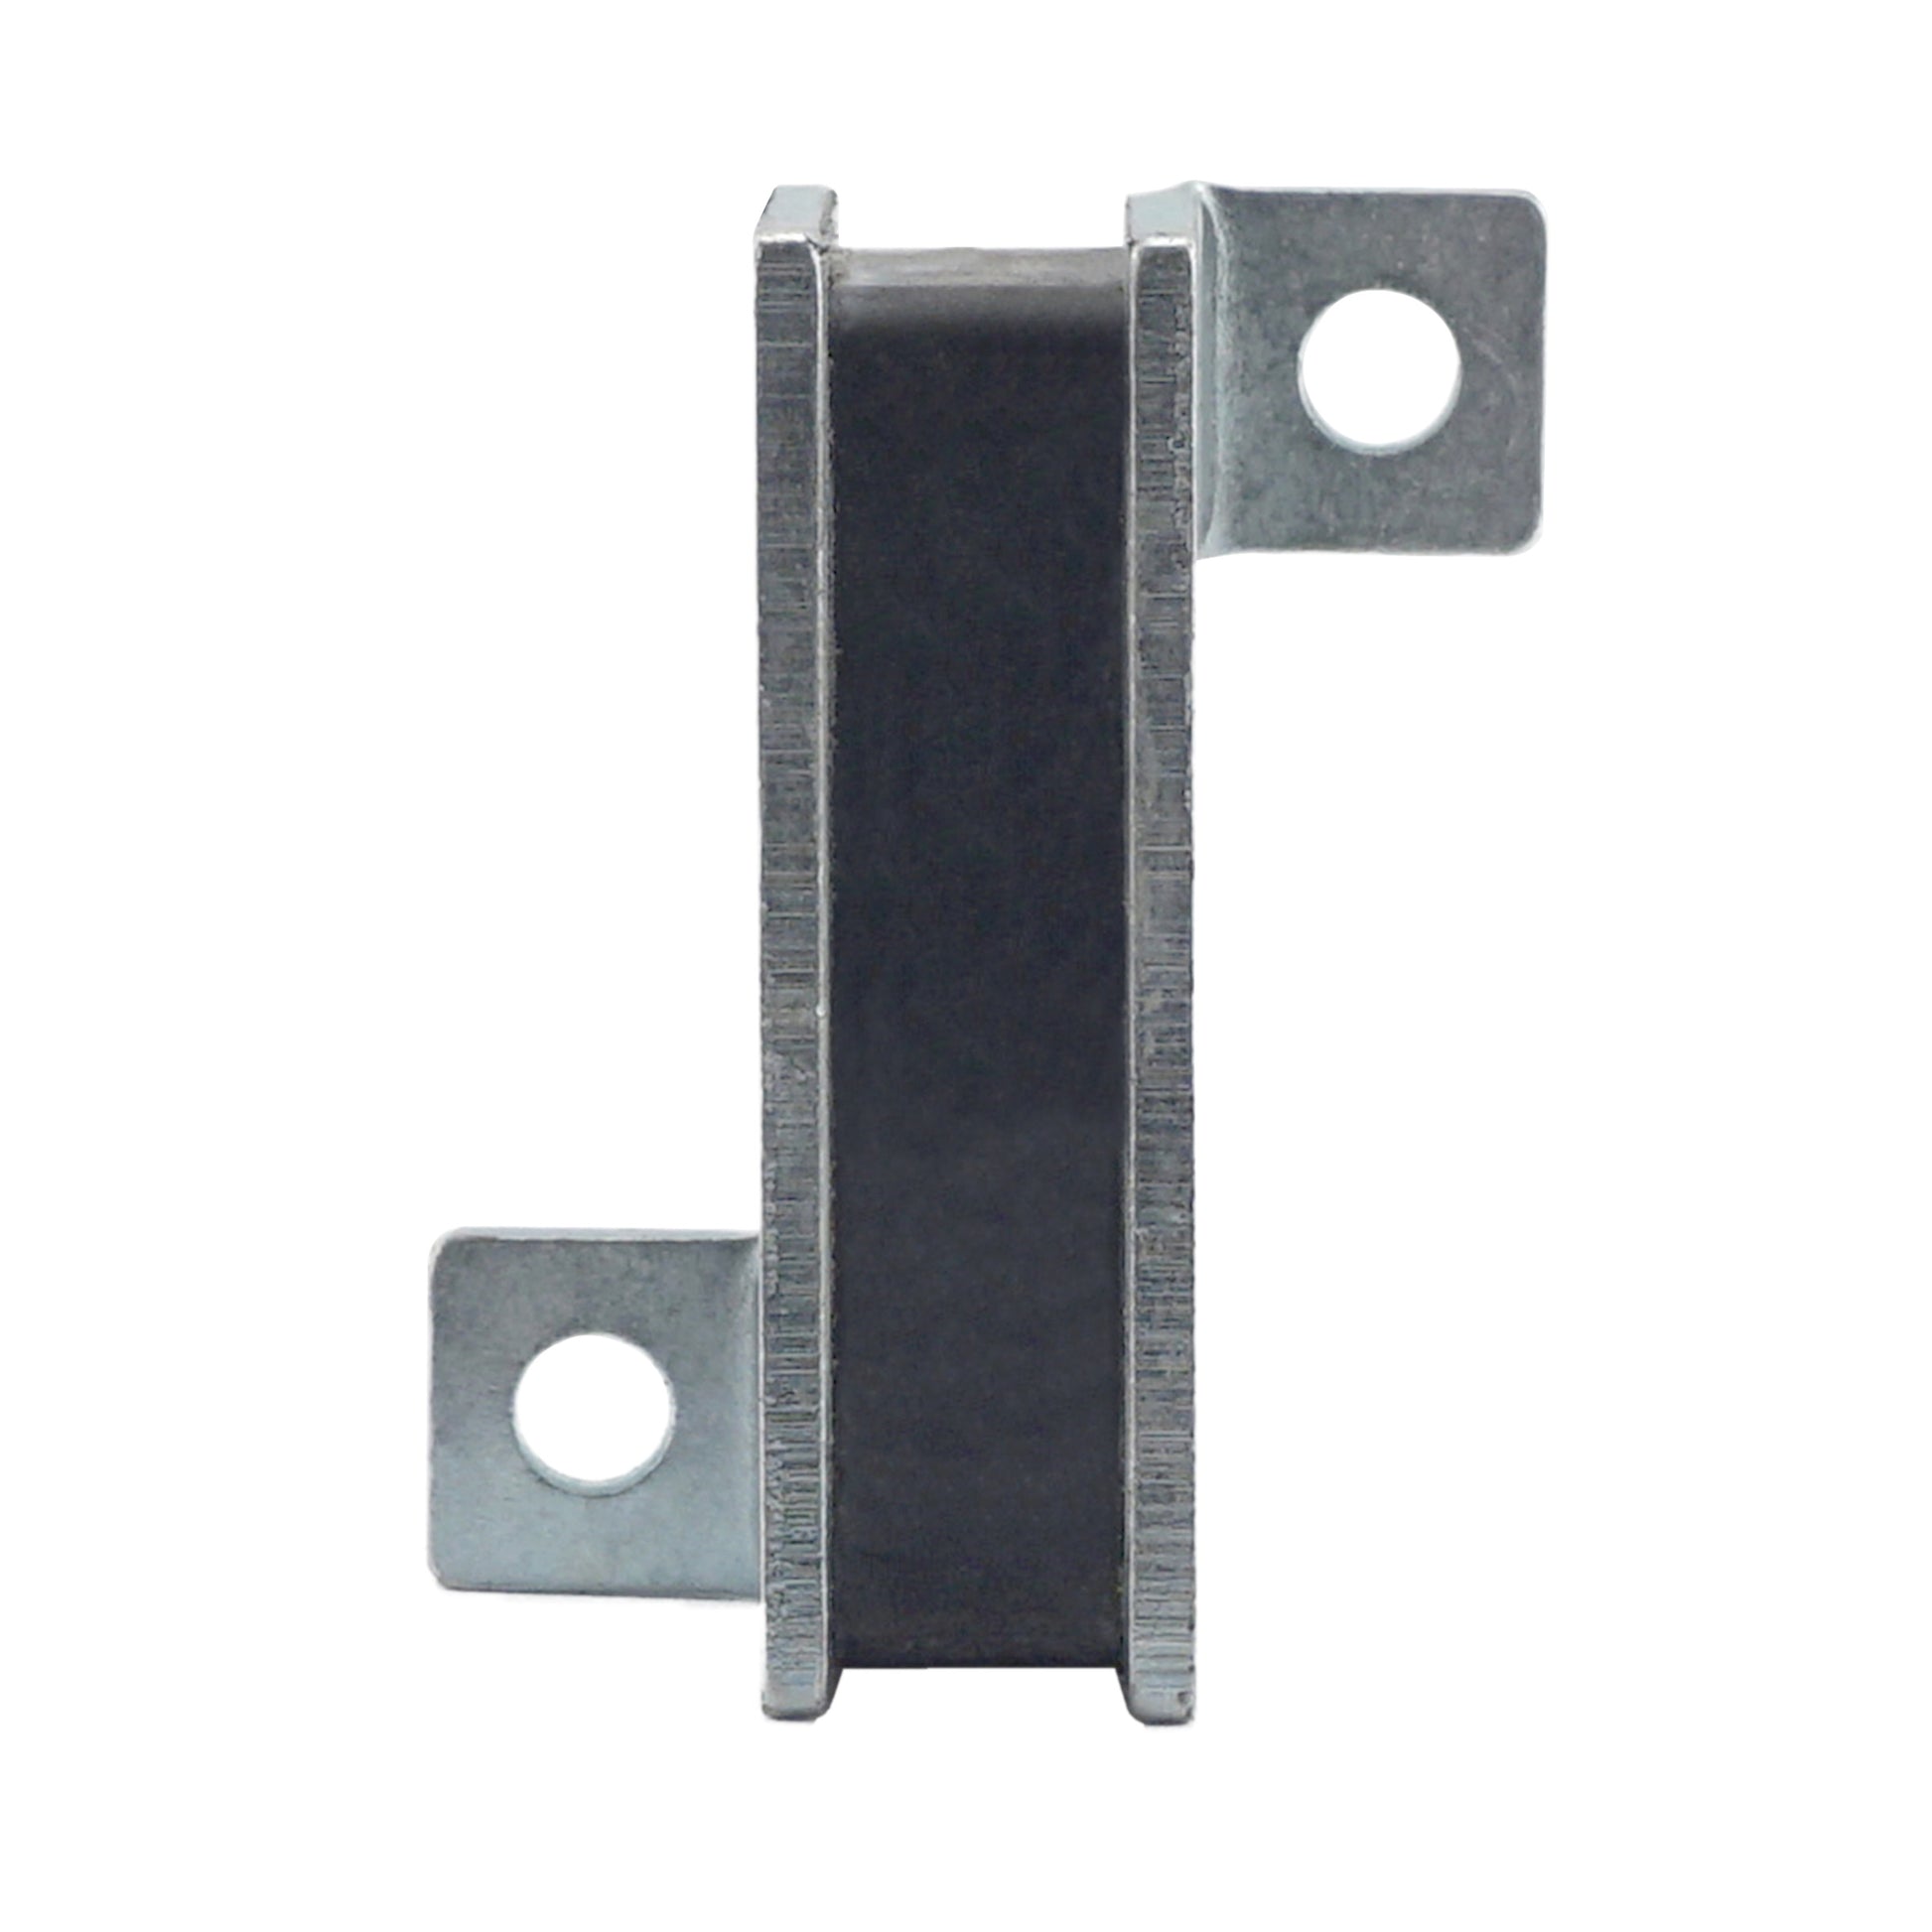 Load image into Gallery viewer, LM40P Ceramic Latch Magnet Assembly - Top View